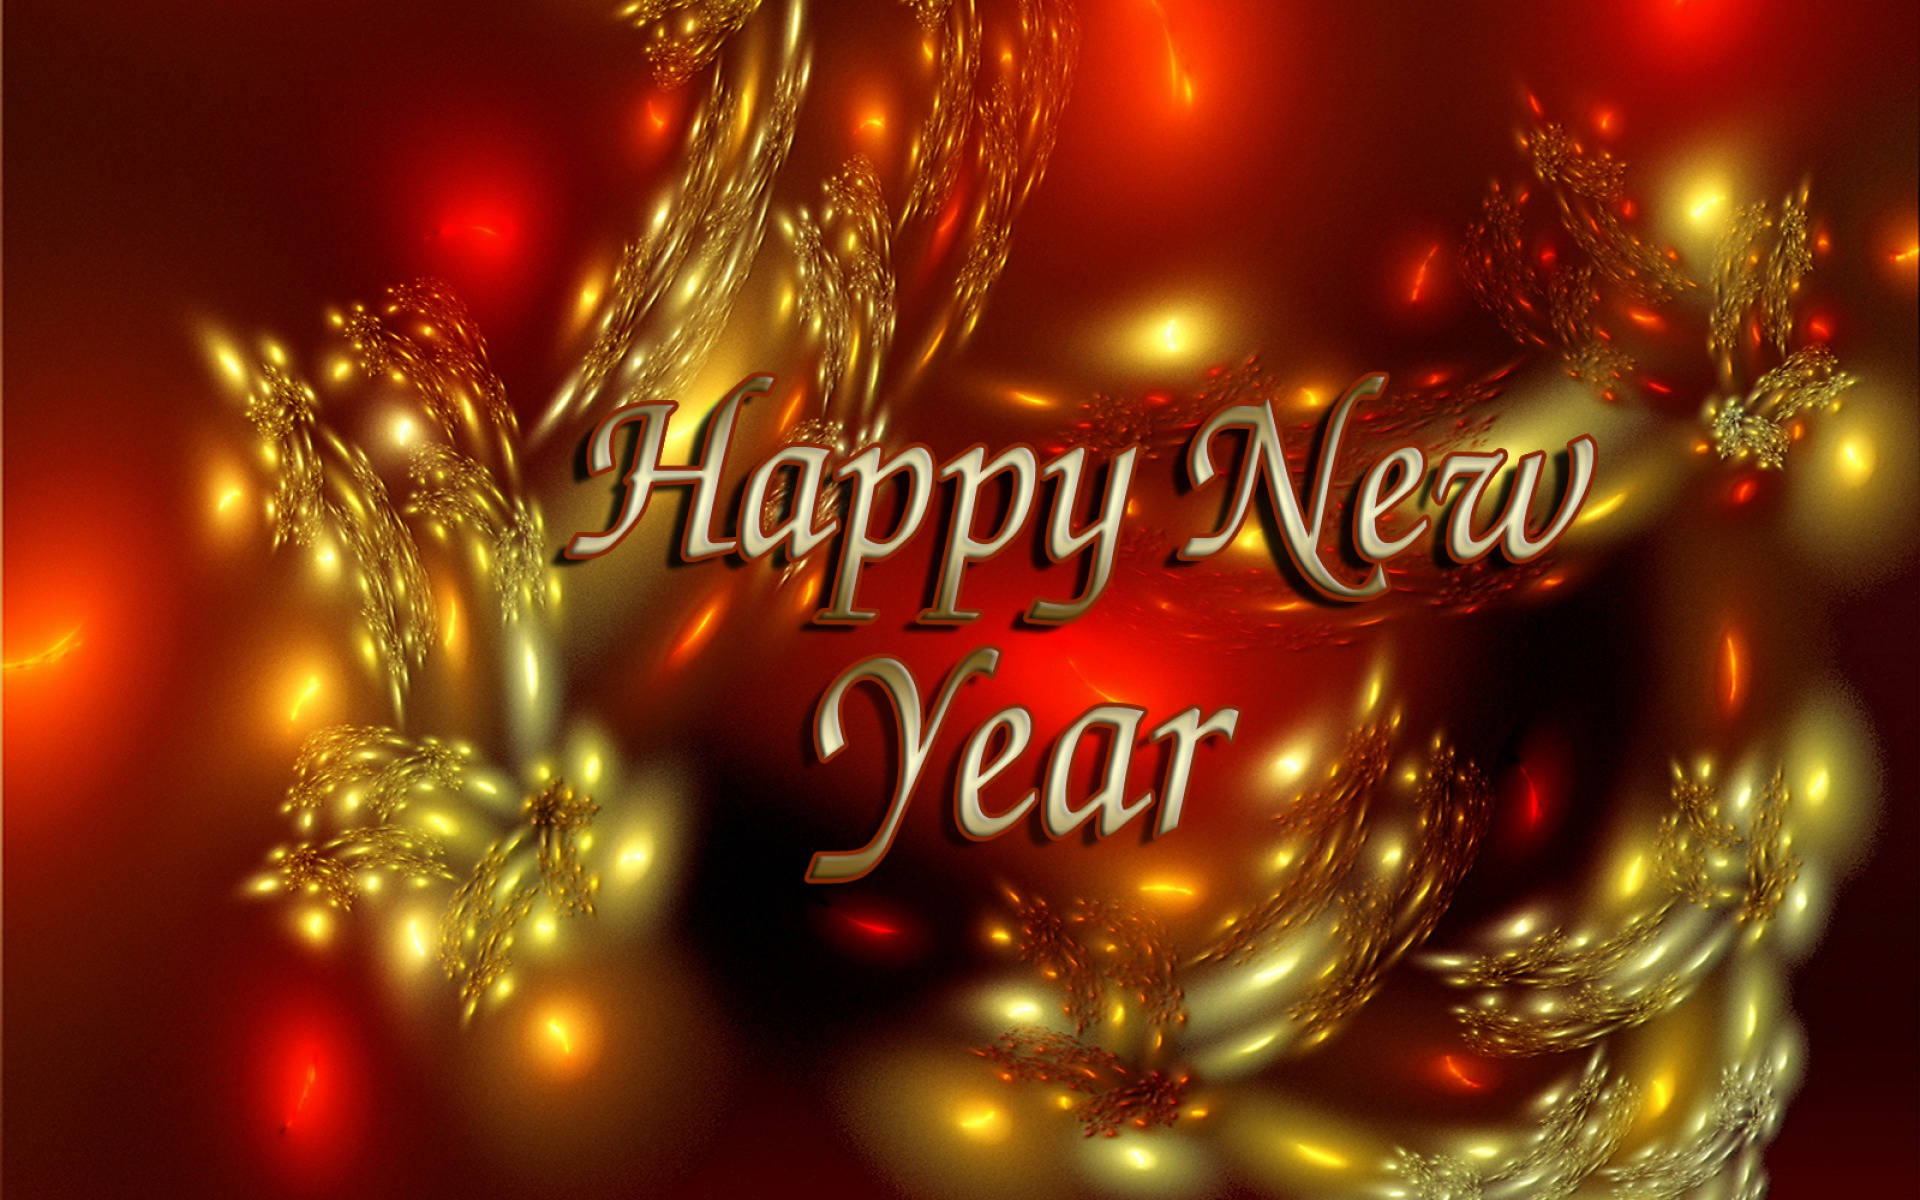 Happy New Year Greetings On Red